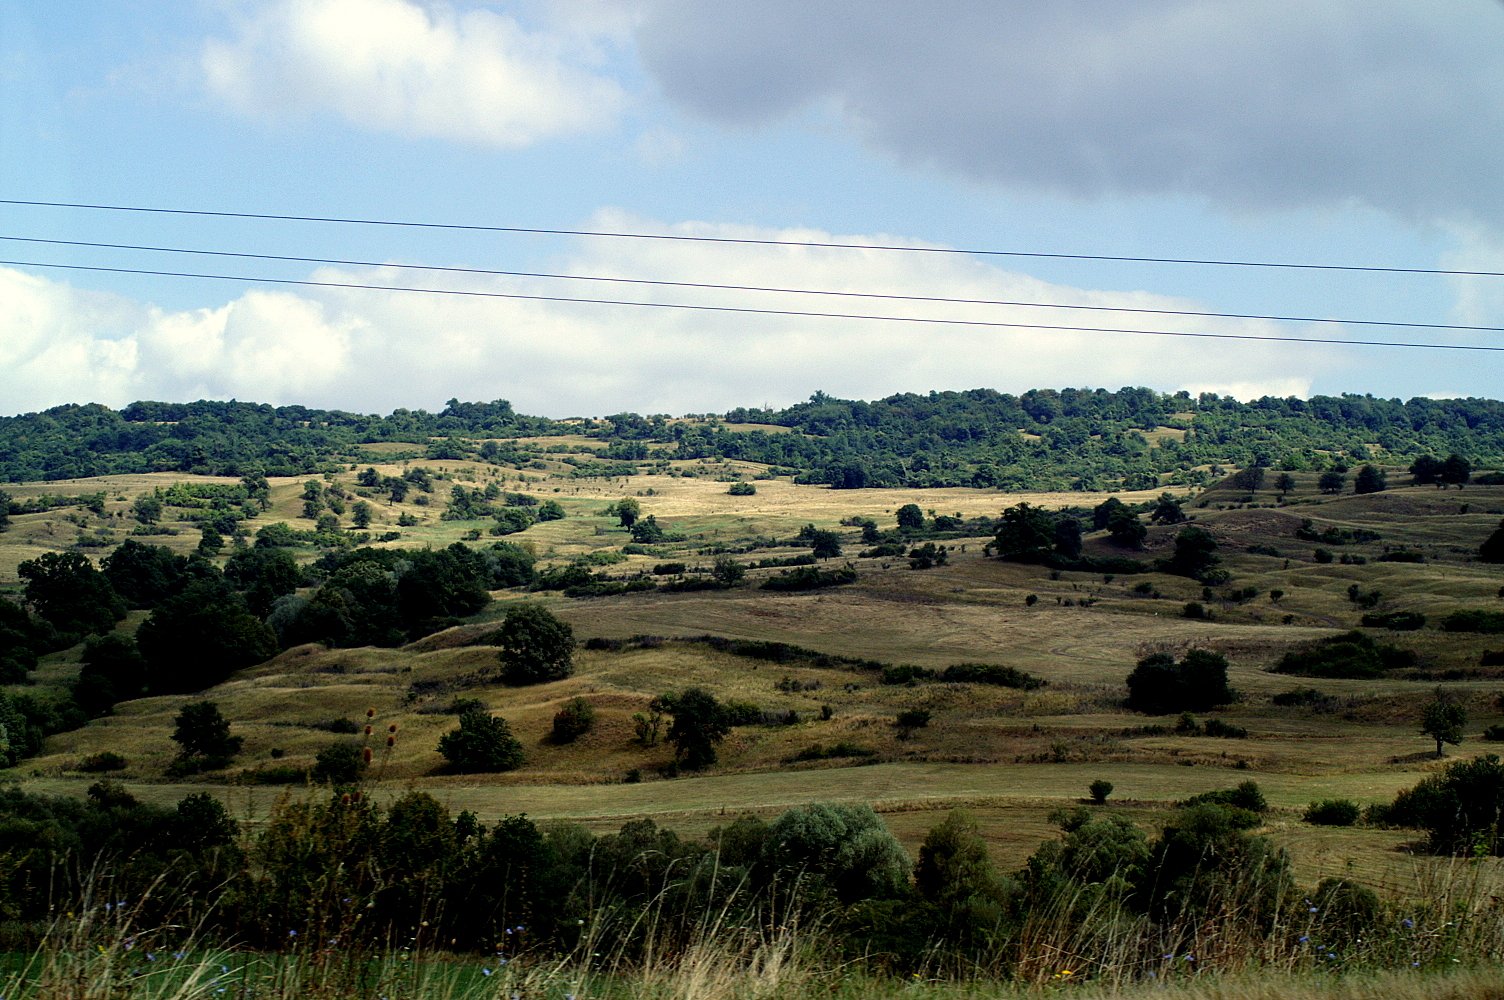 the grassy landscape is partly dry on the mountainside